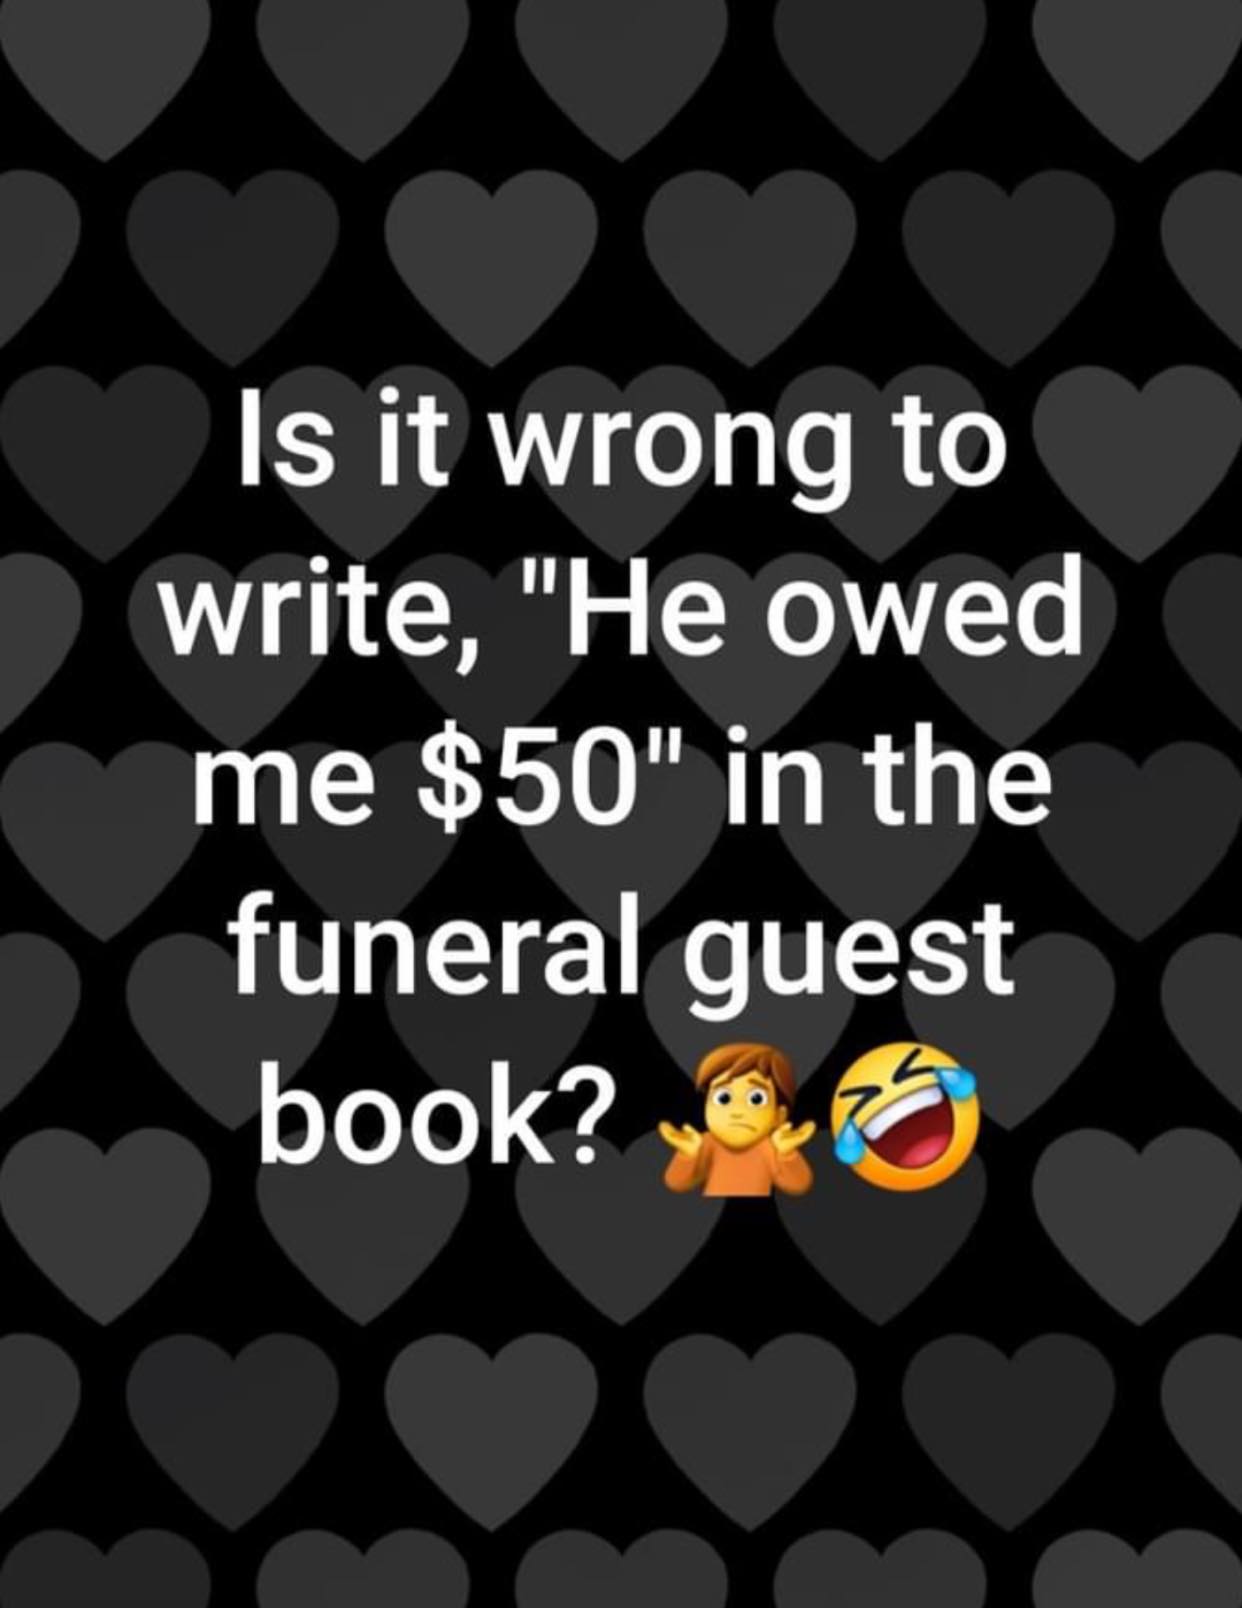 monday morning randomness - rolled over to cuddle forgot im single - Is it wrong to write, "He owed me $50" in the funeral guest book?